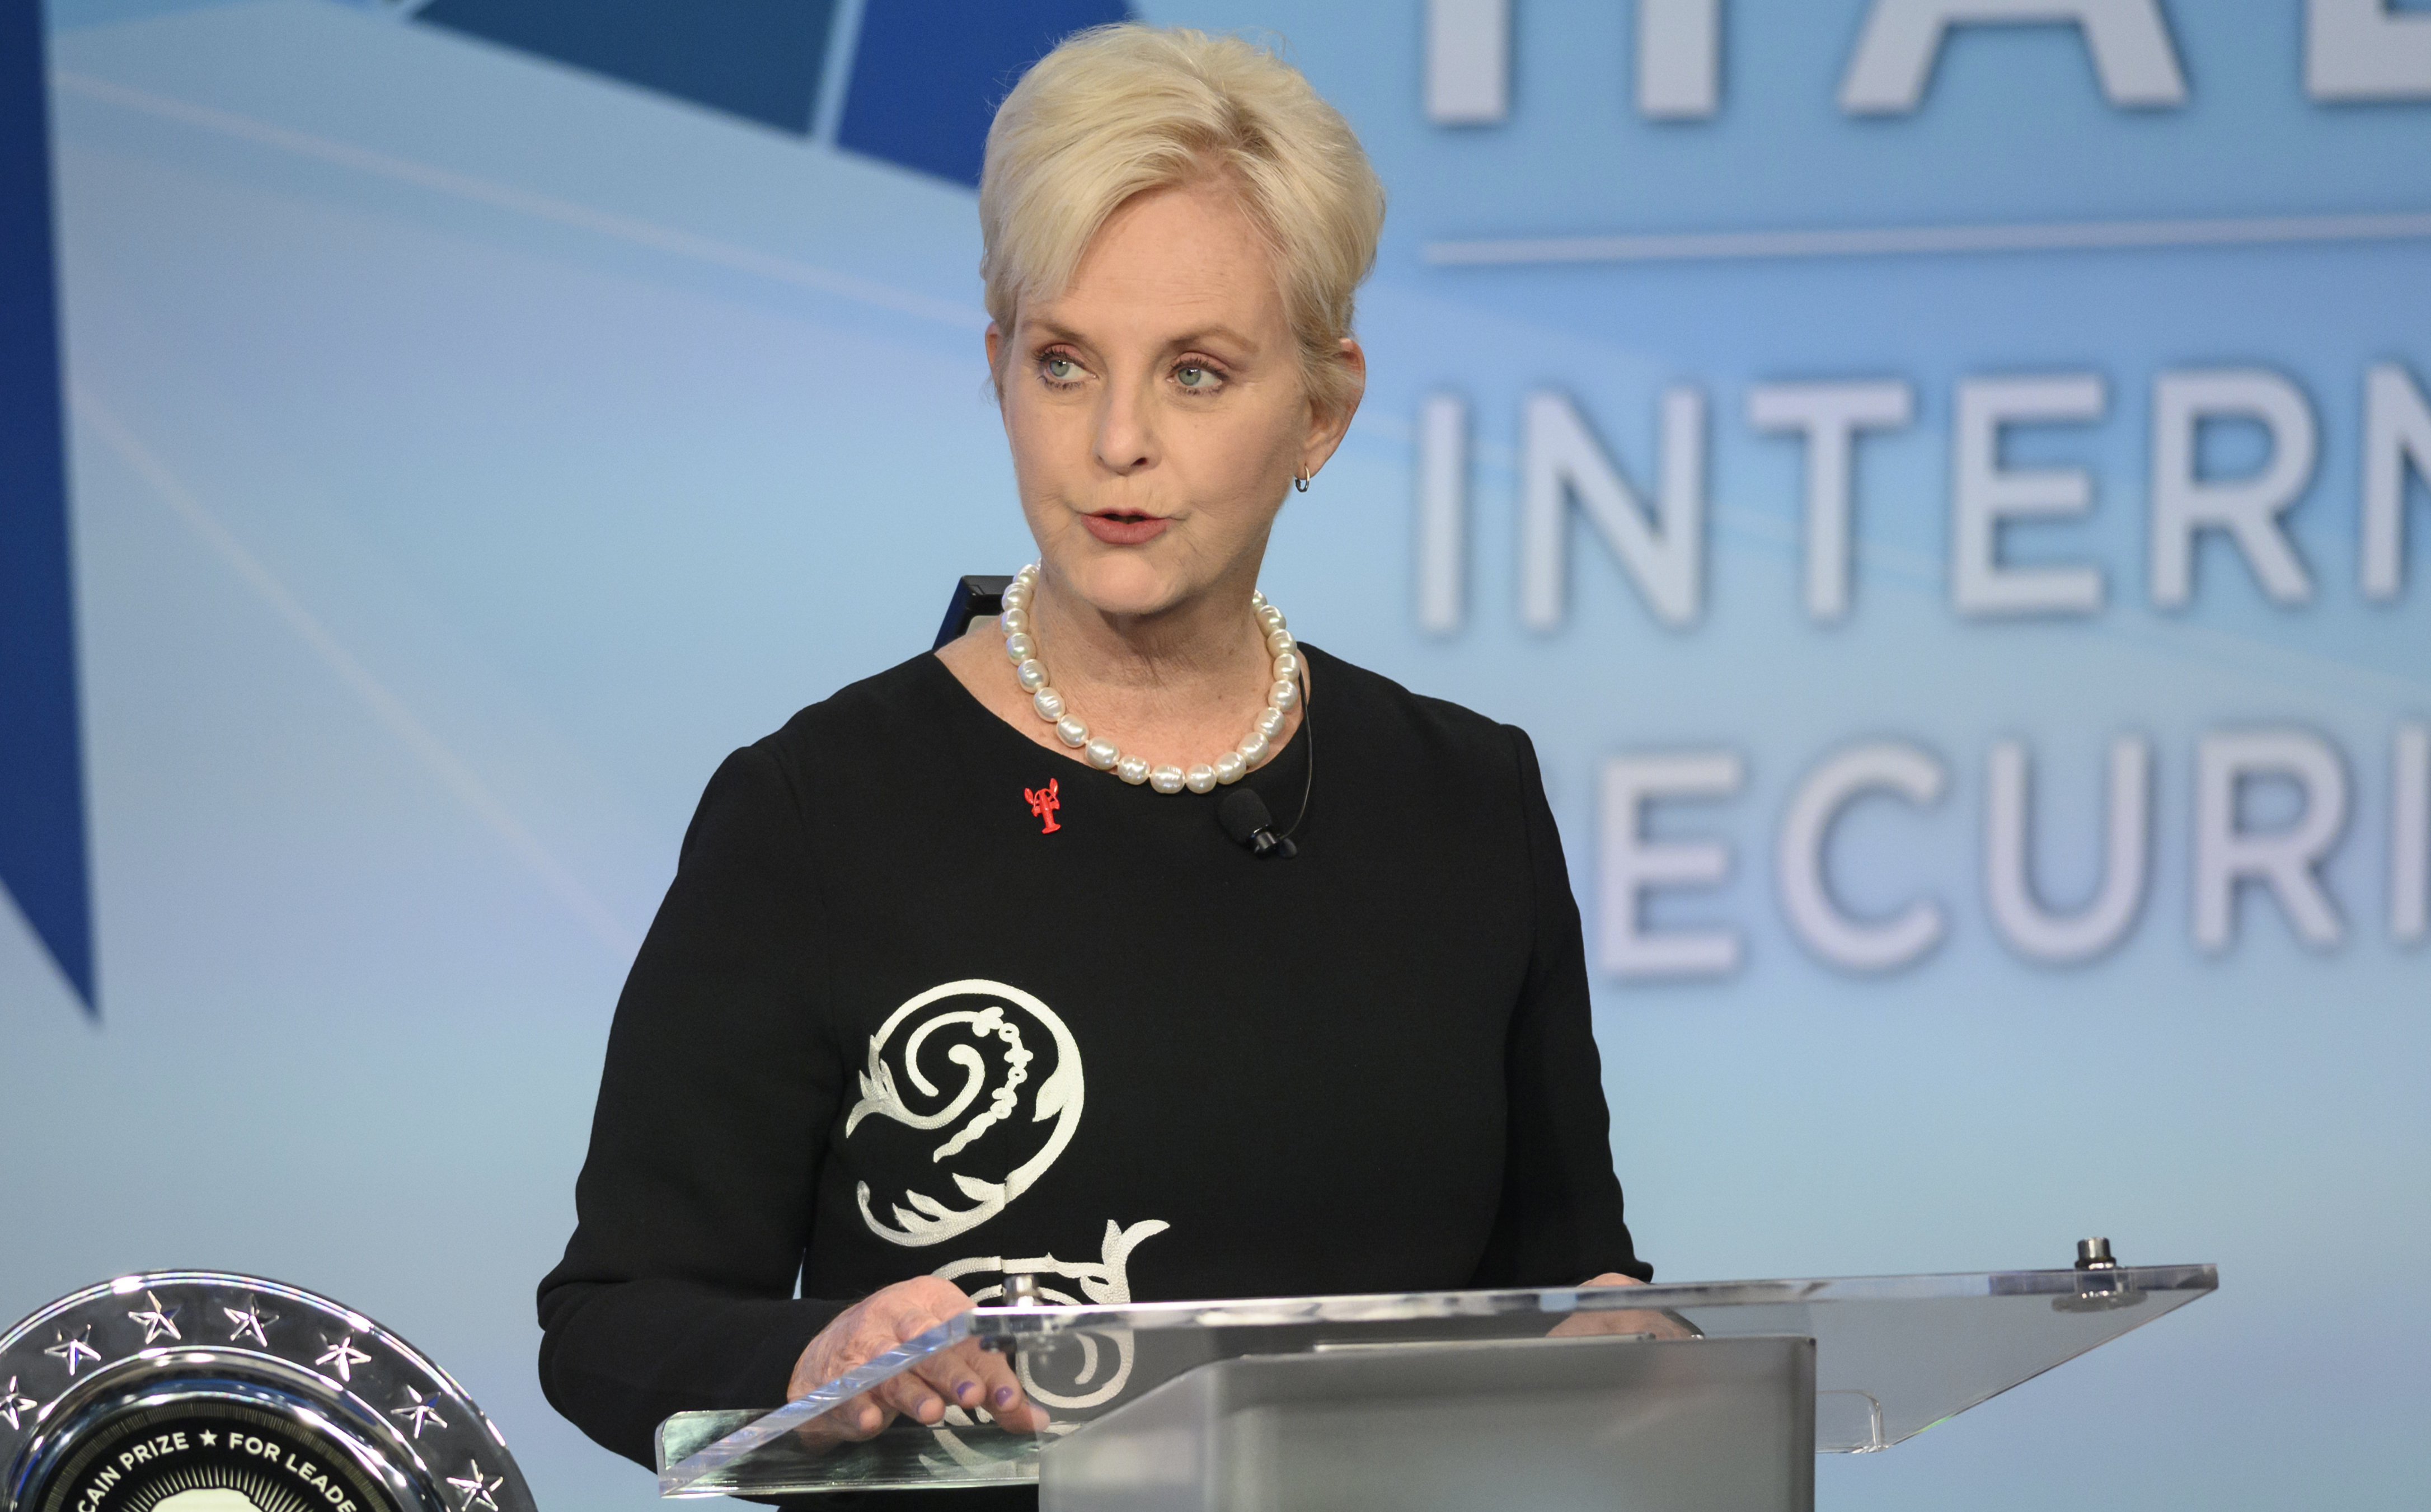 Cindy McCain apology shows challenge for mixed-race families